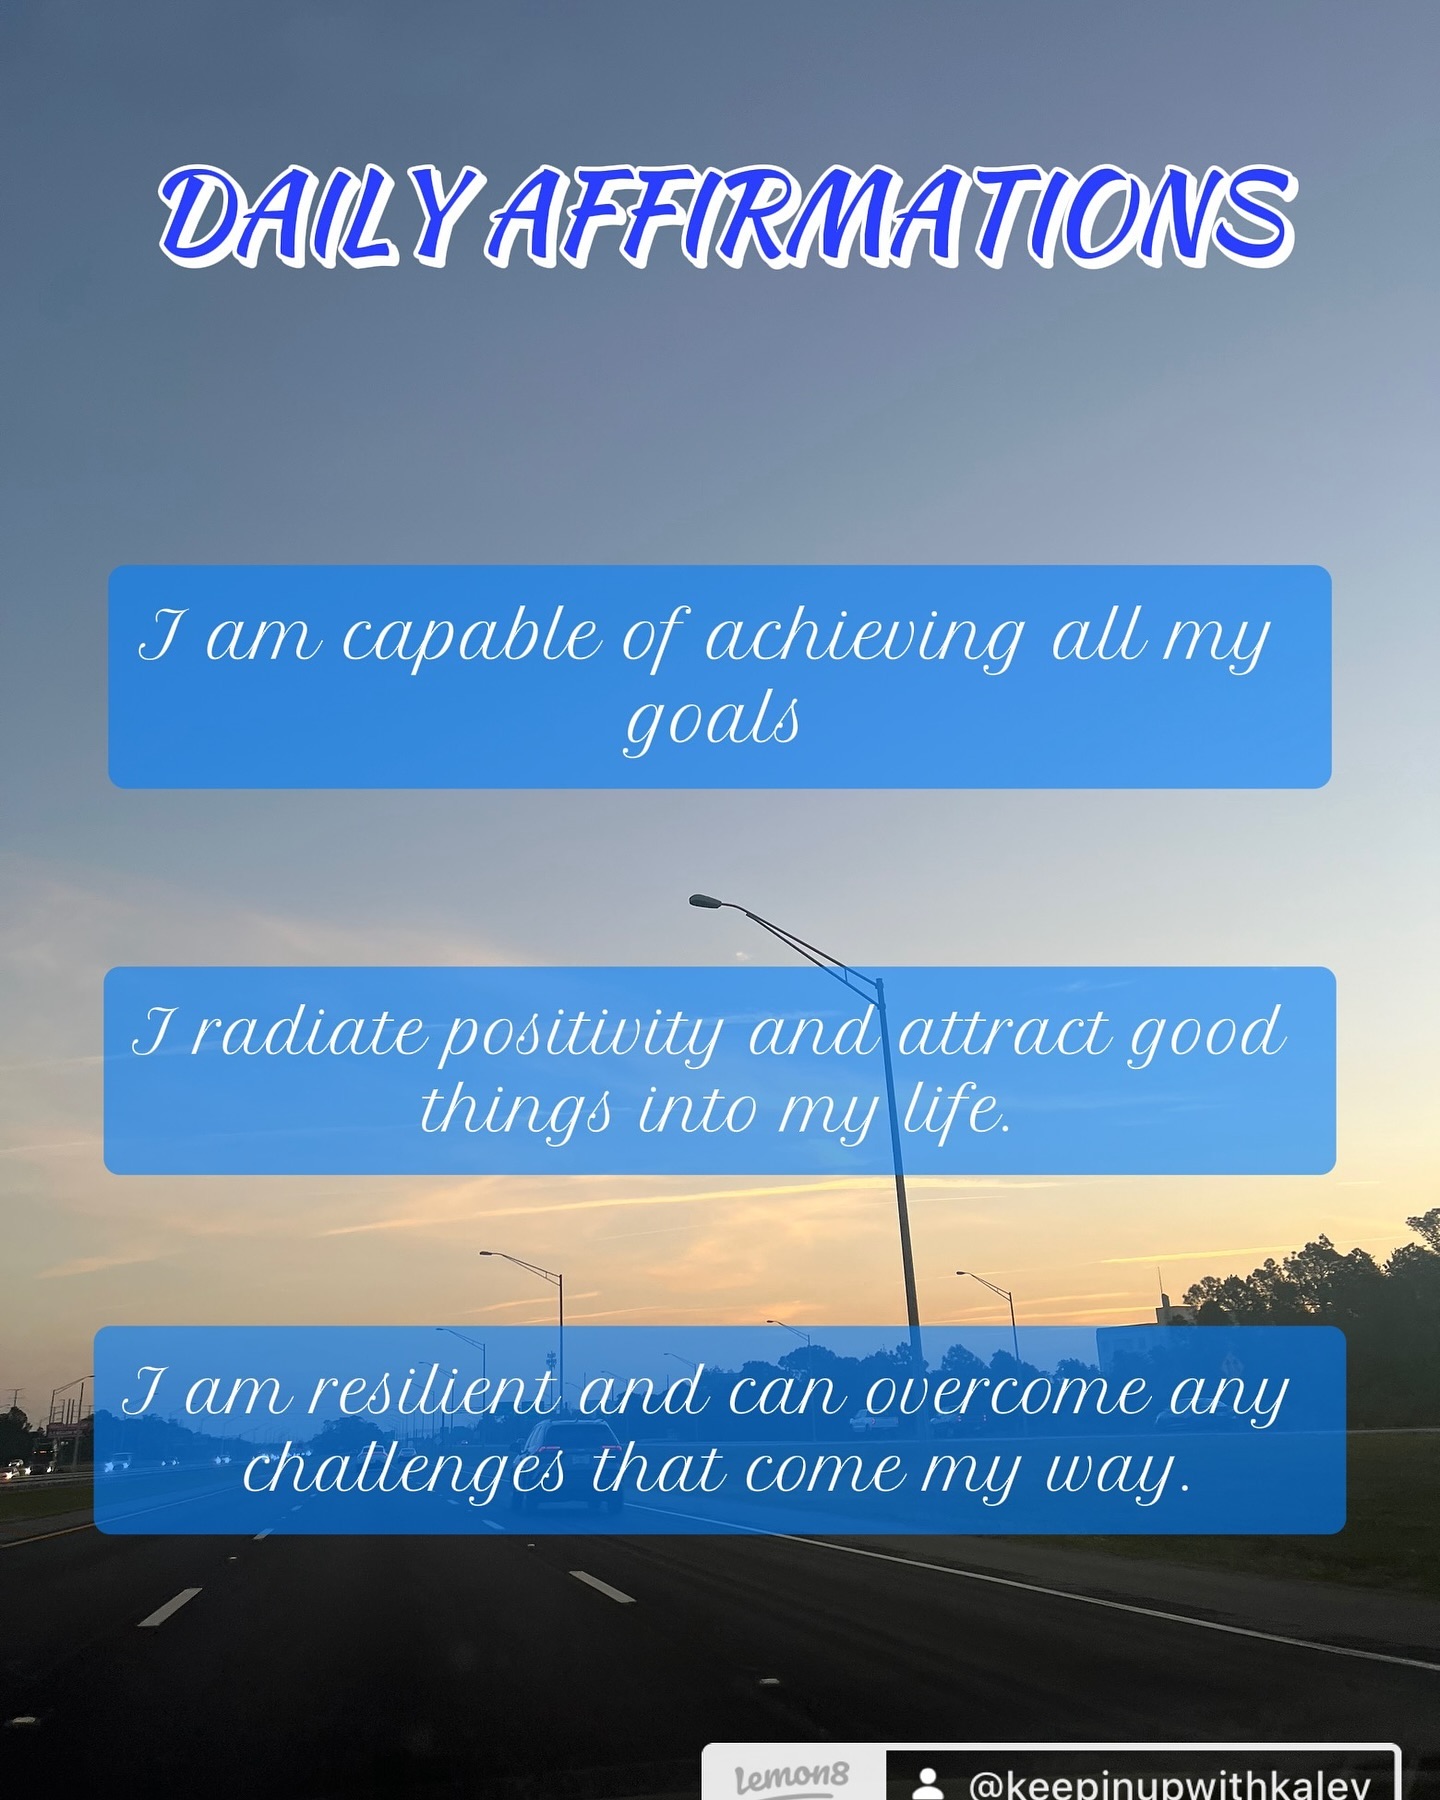 Affirmations are one of the greatest tools for shifting your mindset 🫶🏻 
#mindset #affirmations #dailyaffirmations #positiveaffirmations #growthmindset #personaldevelopment #explore #explorepage #fyp #foryou